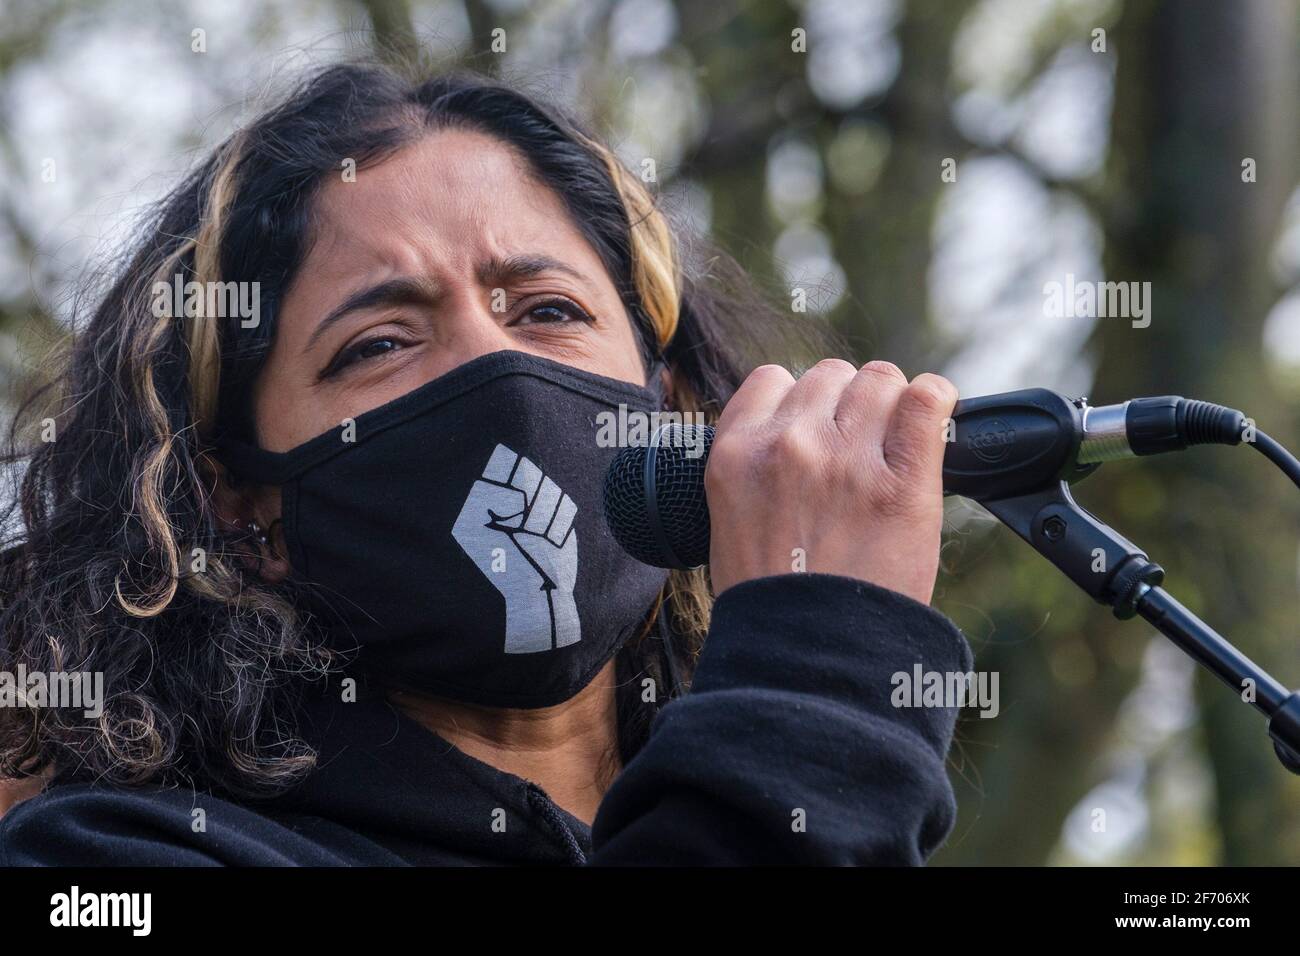 Sheffield, UK. 03rd Apr, 2021. Protestors at ‘Kill The Bill' protest against the Police, Crime, Sentencing and Courts Bill, in Sheffield, north of England on Saturday, April 3rd, 2021. Credit: Mark Harvey/Alamy Live News  Stock Photo